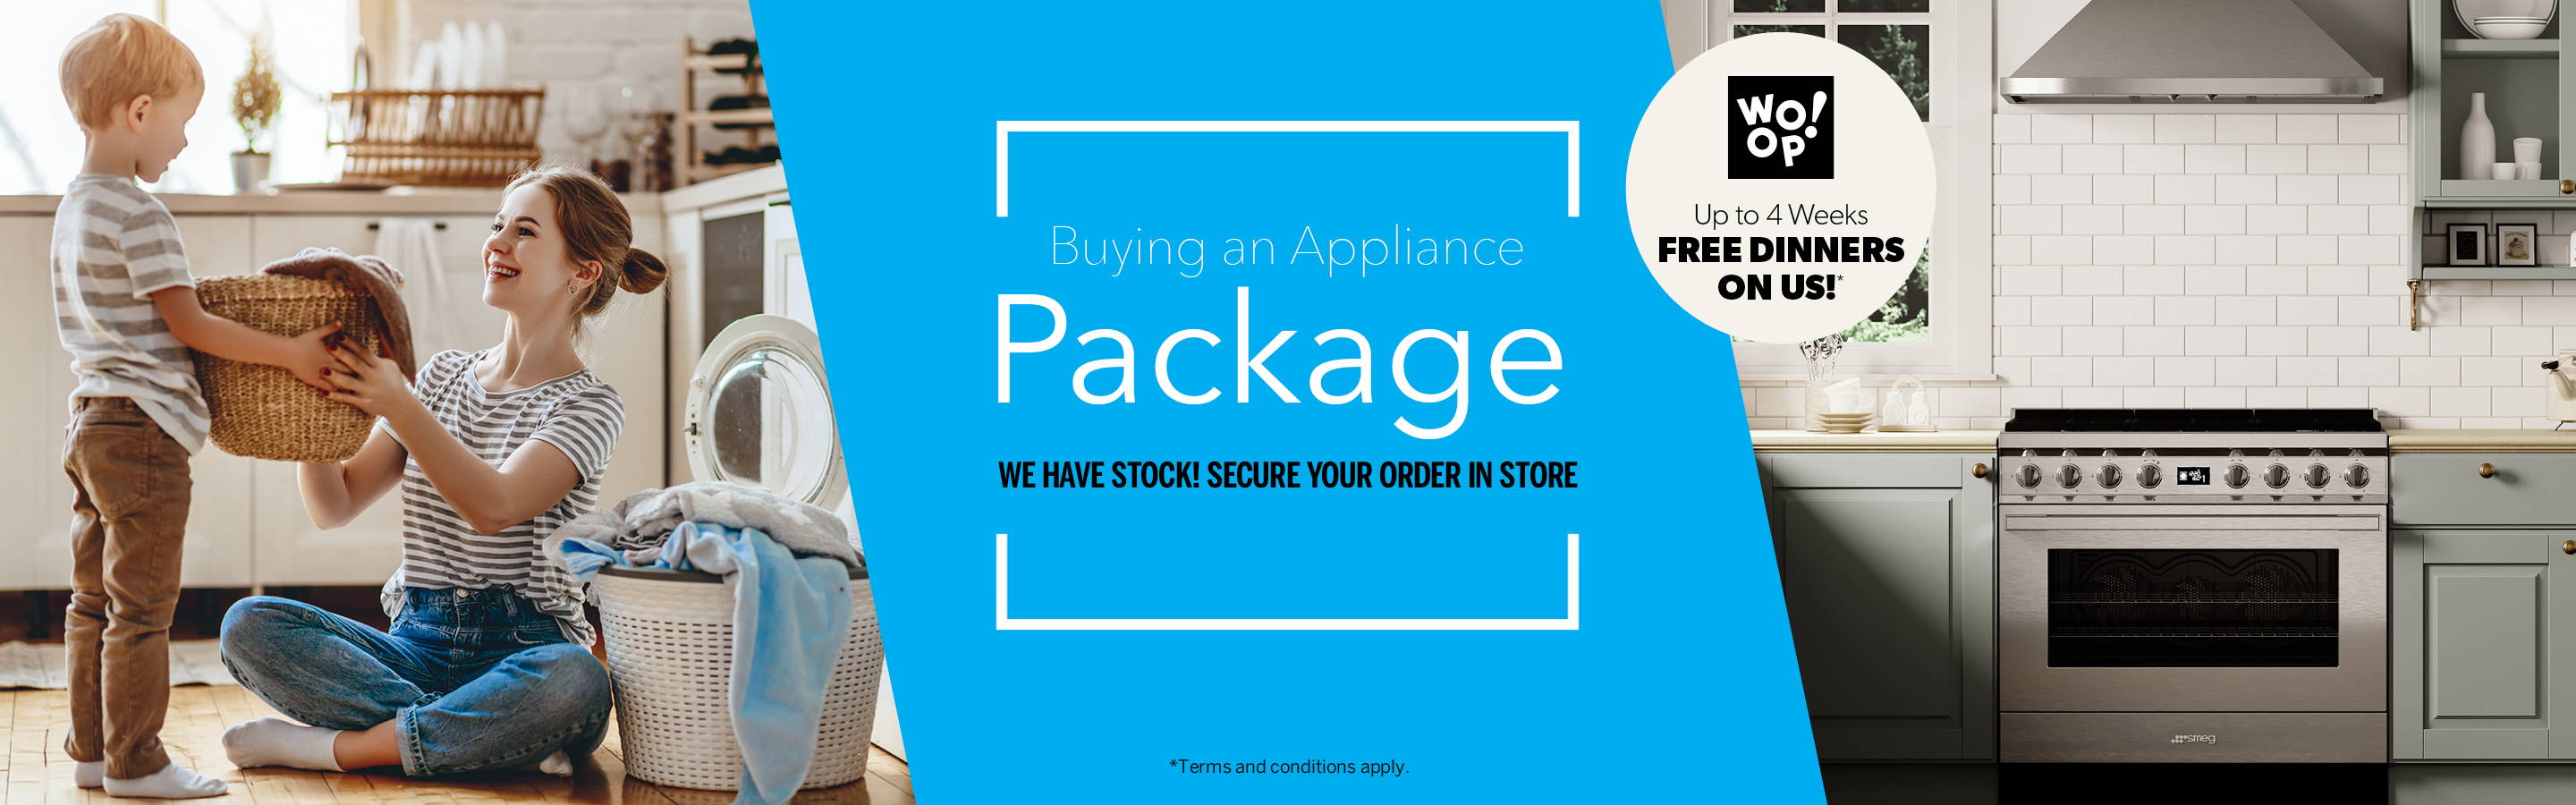 Buying An Appliance Package